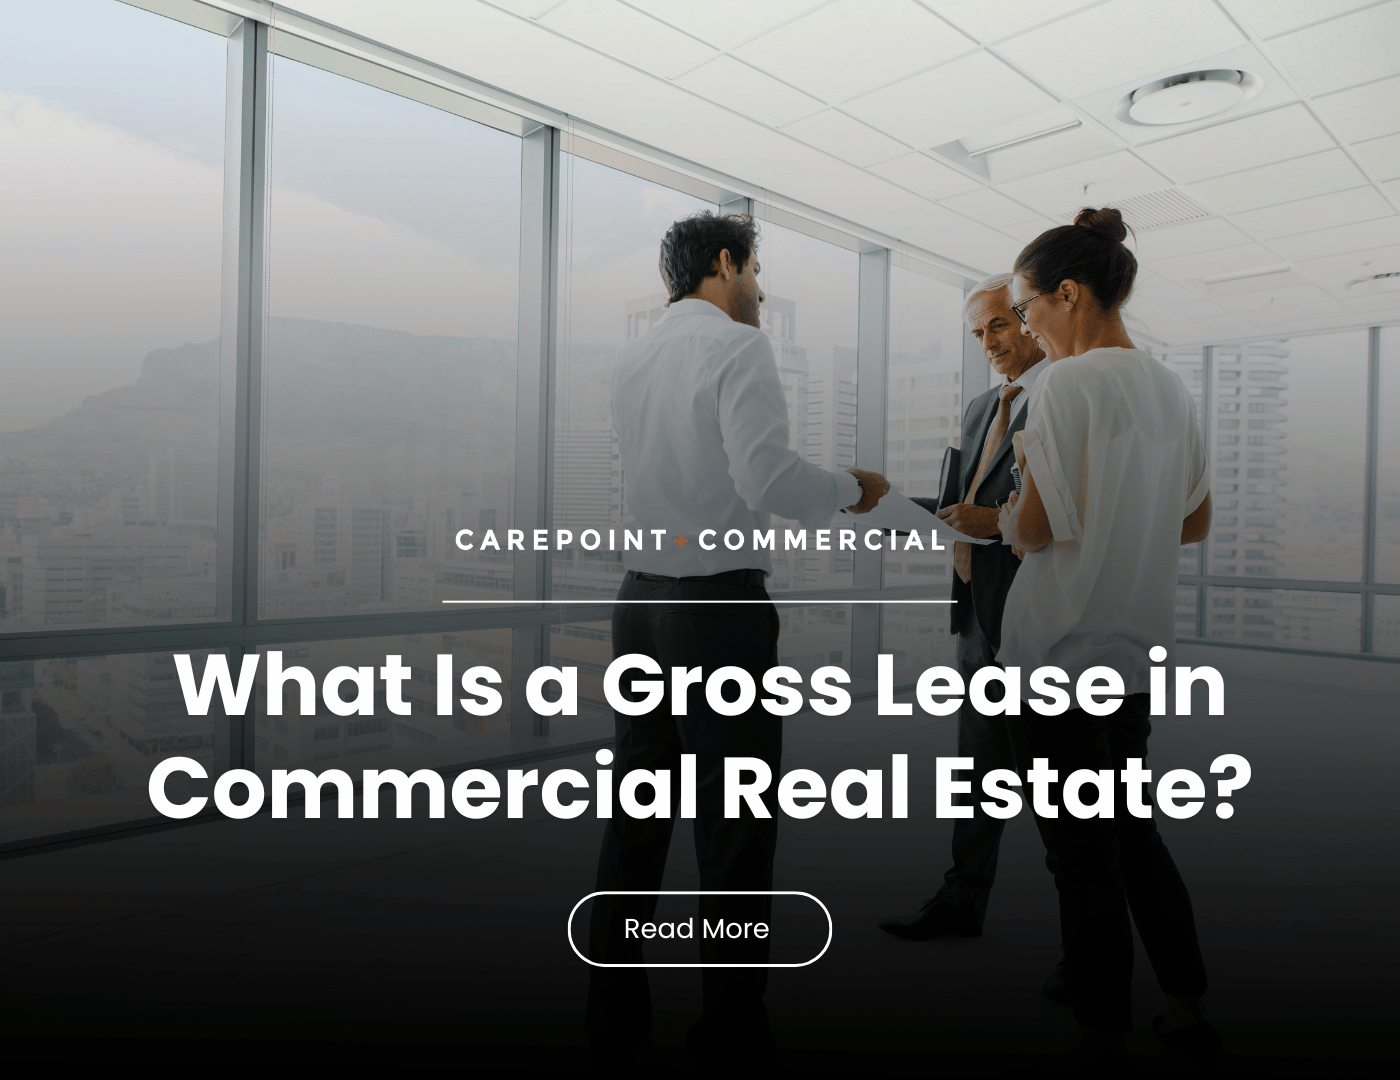 What is a Gross Lease in Commercial Real Estate?